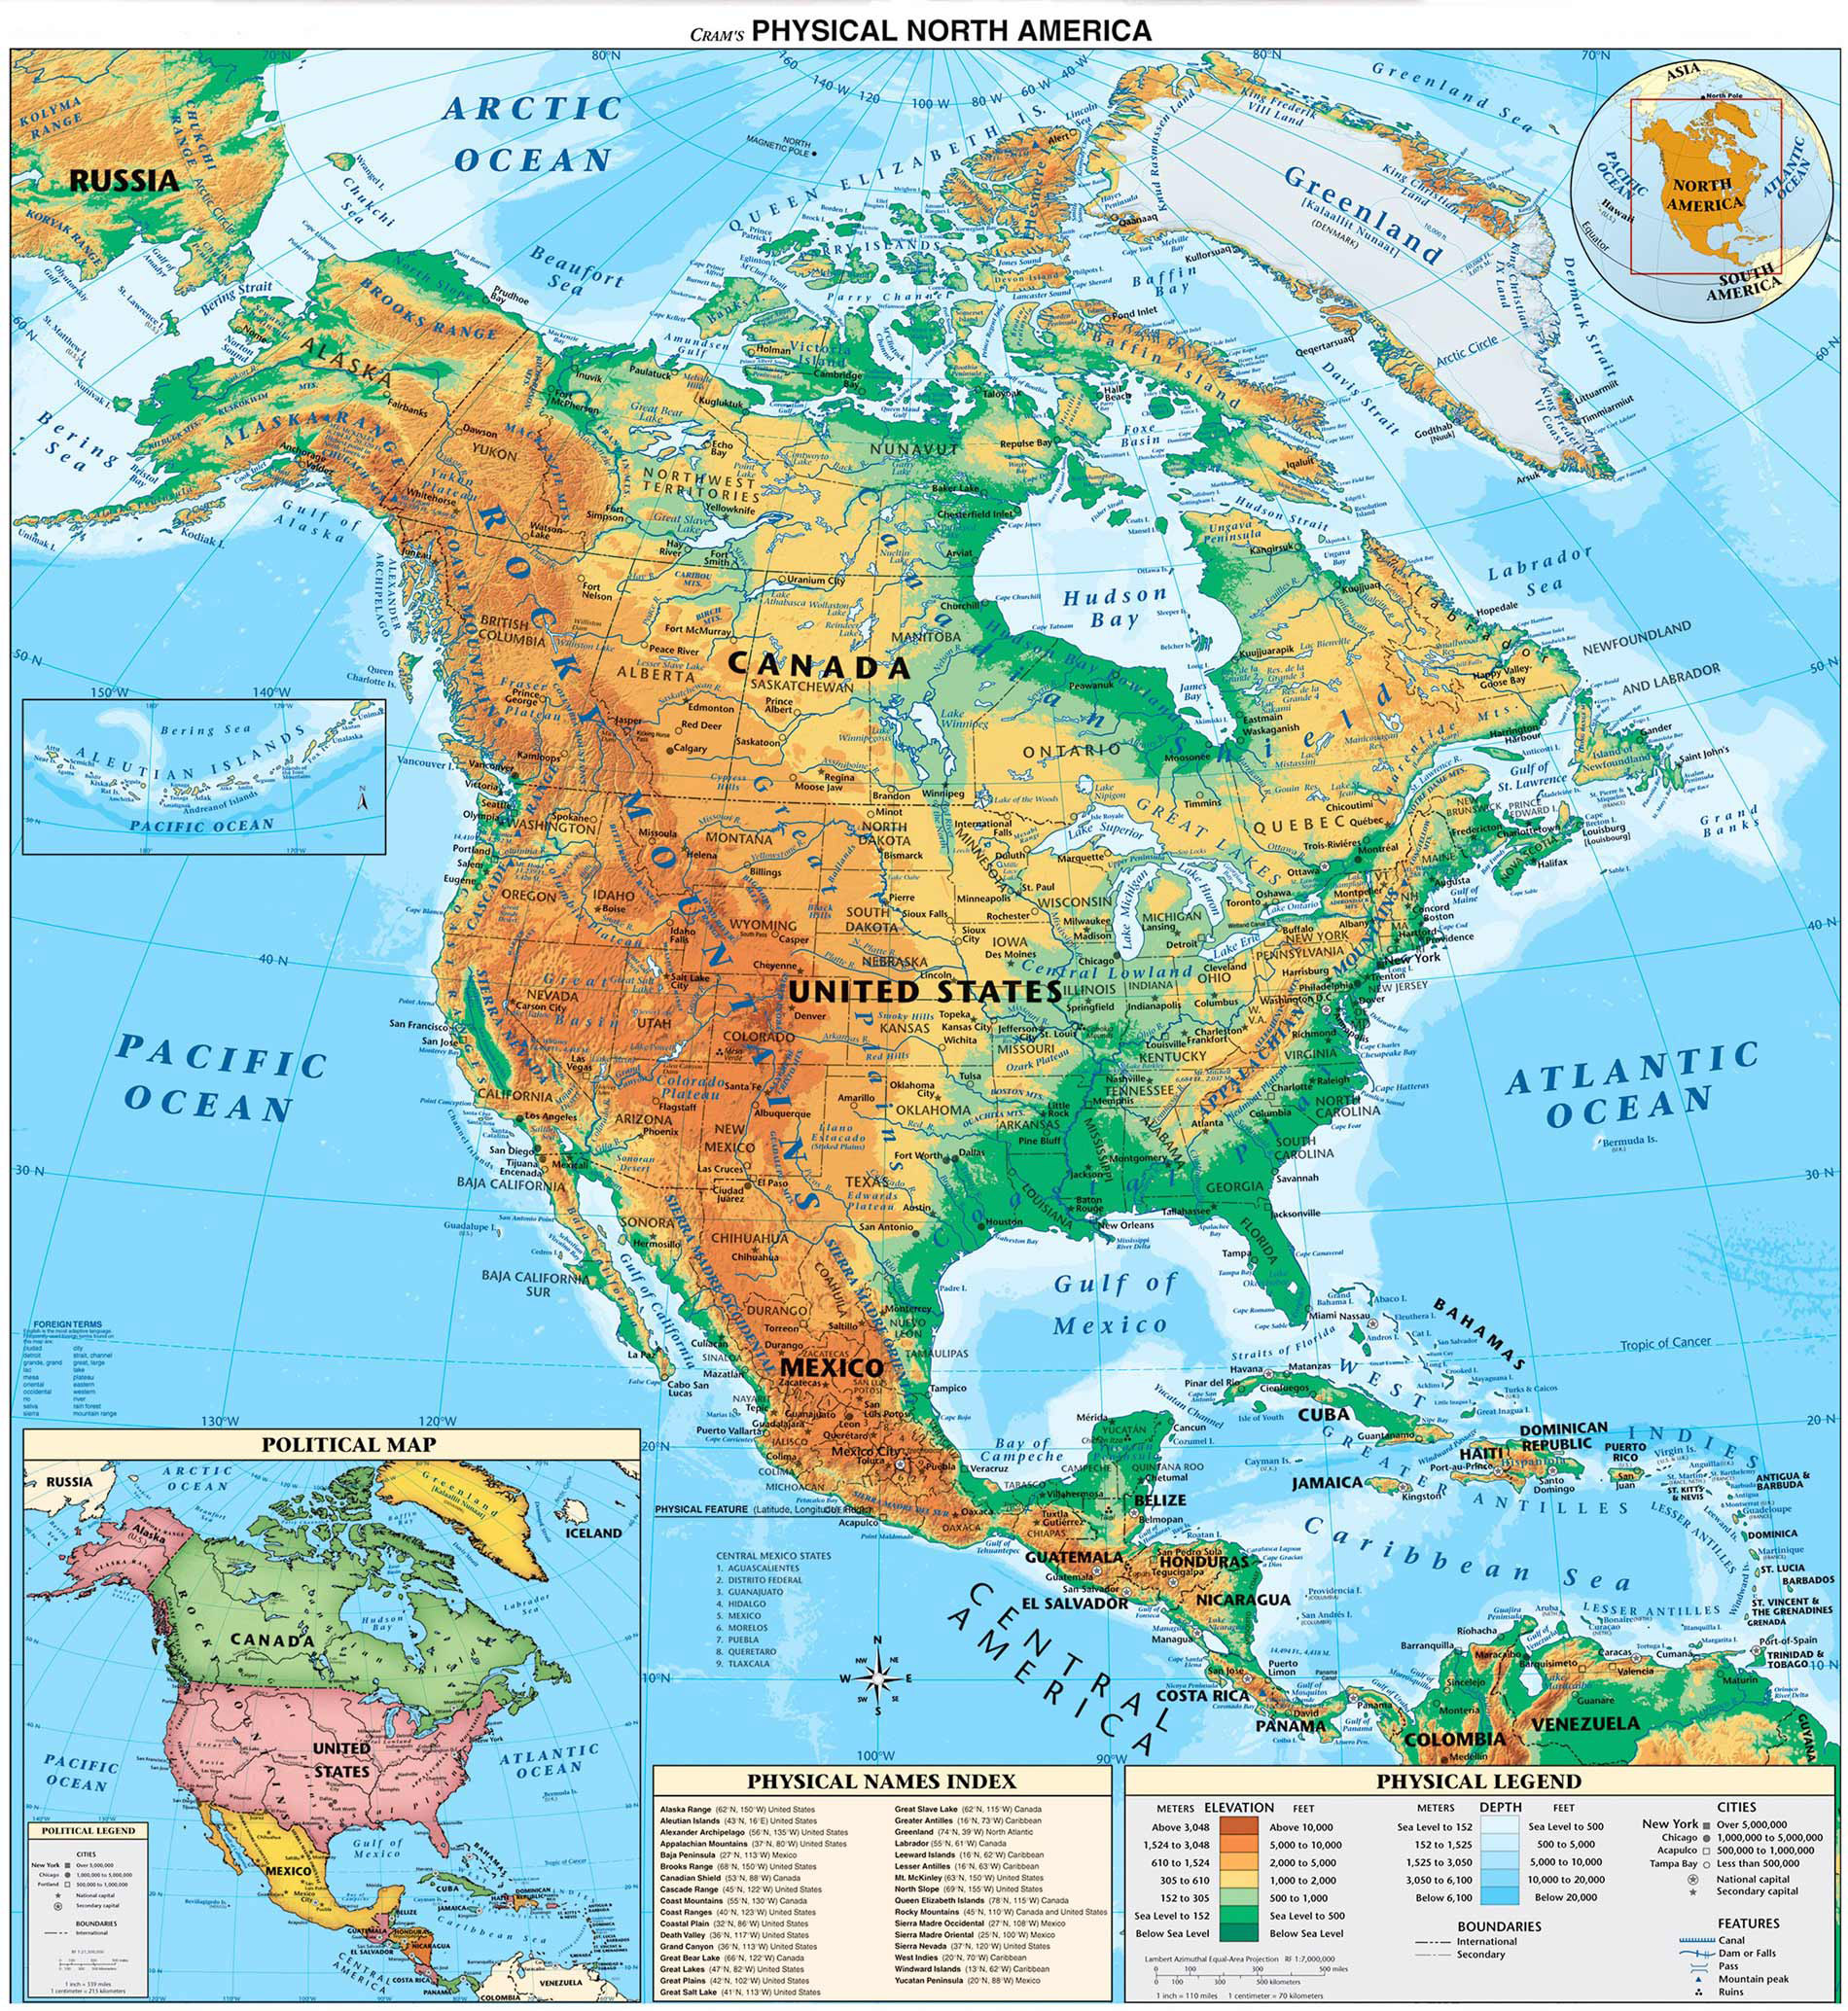 north-and-central-america-detailed-physical-map-detailed-physical-map-of-north-and-central